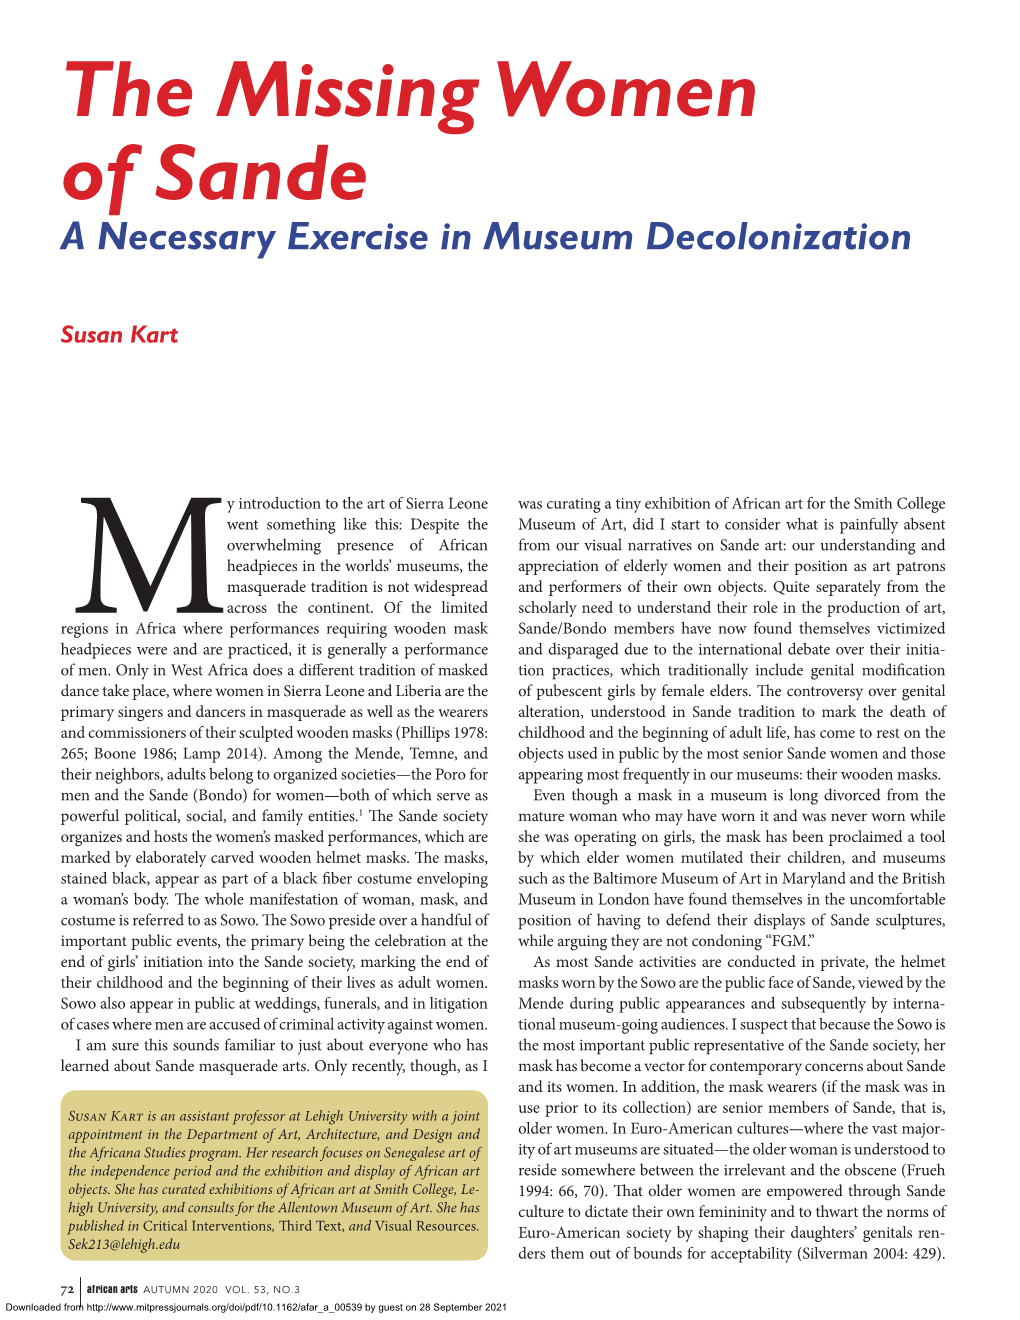 The Missing Women of Sande a Necessary Exercise in Museum Decolonization